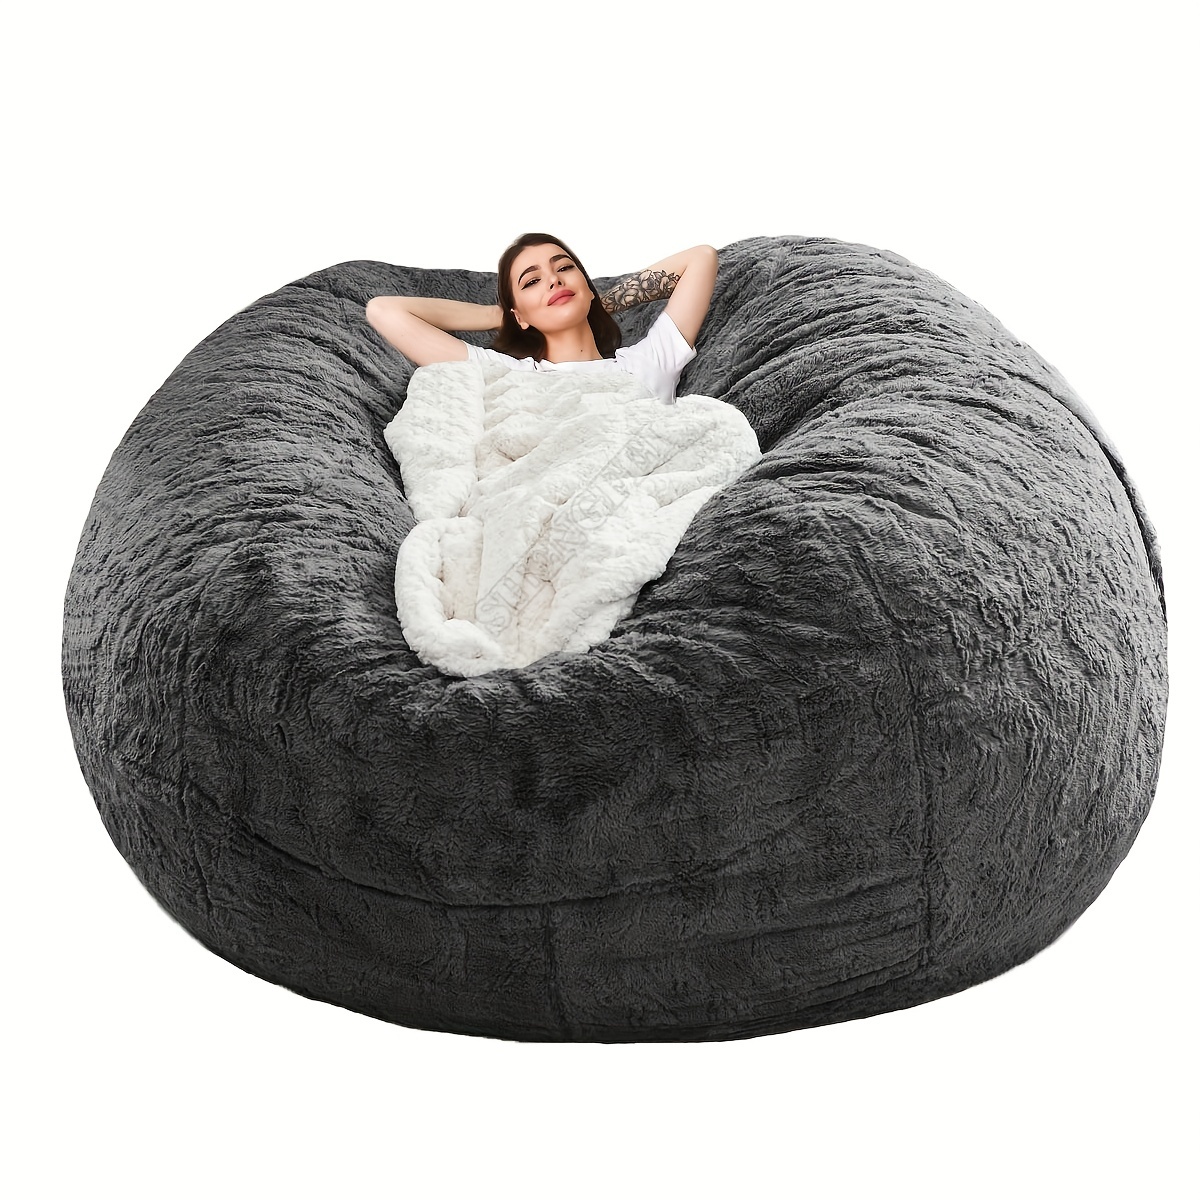 4ft Bean Bag Chair for Adults, Memory Foam Bean Bag Chair with Removable  and Washable Velvet Cover, Grey - Walmart.com